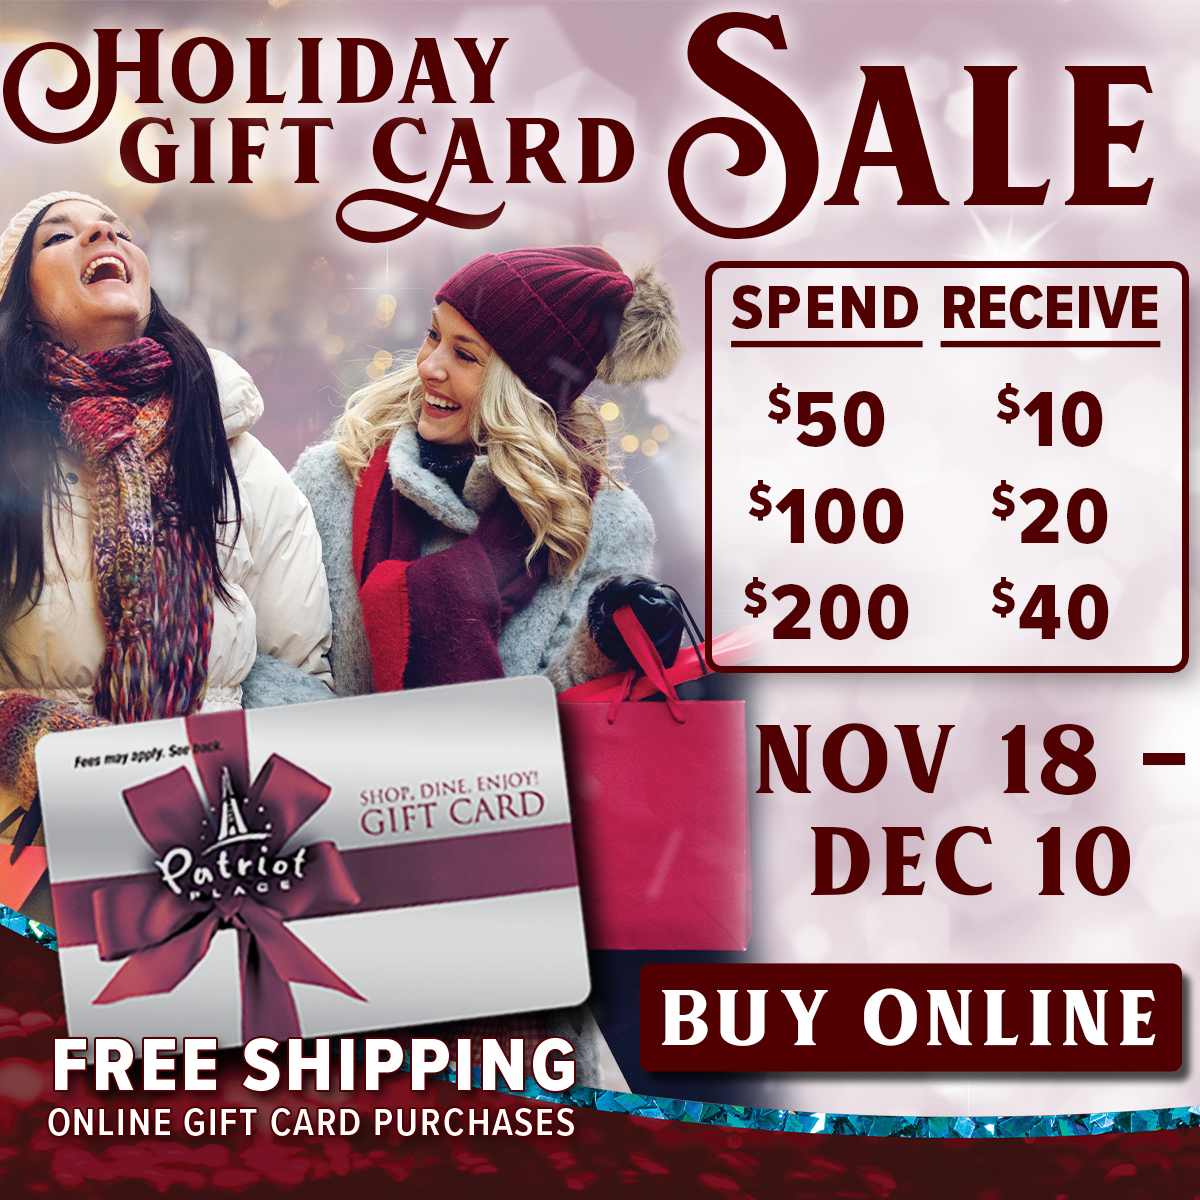 Patriot Place Gift Cards